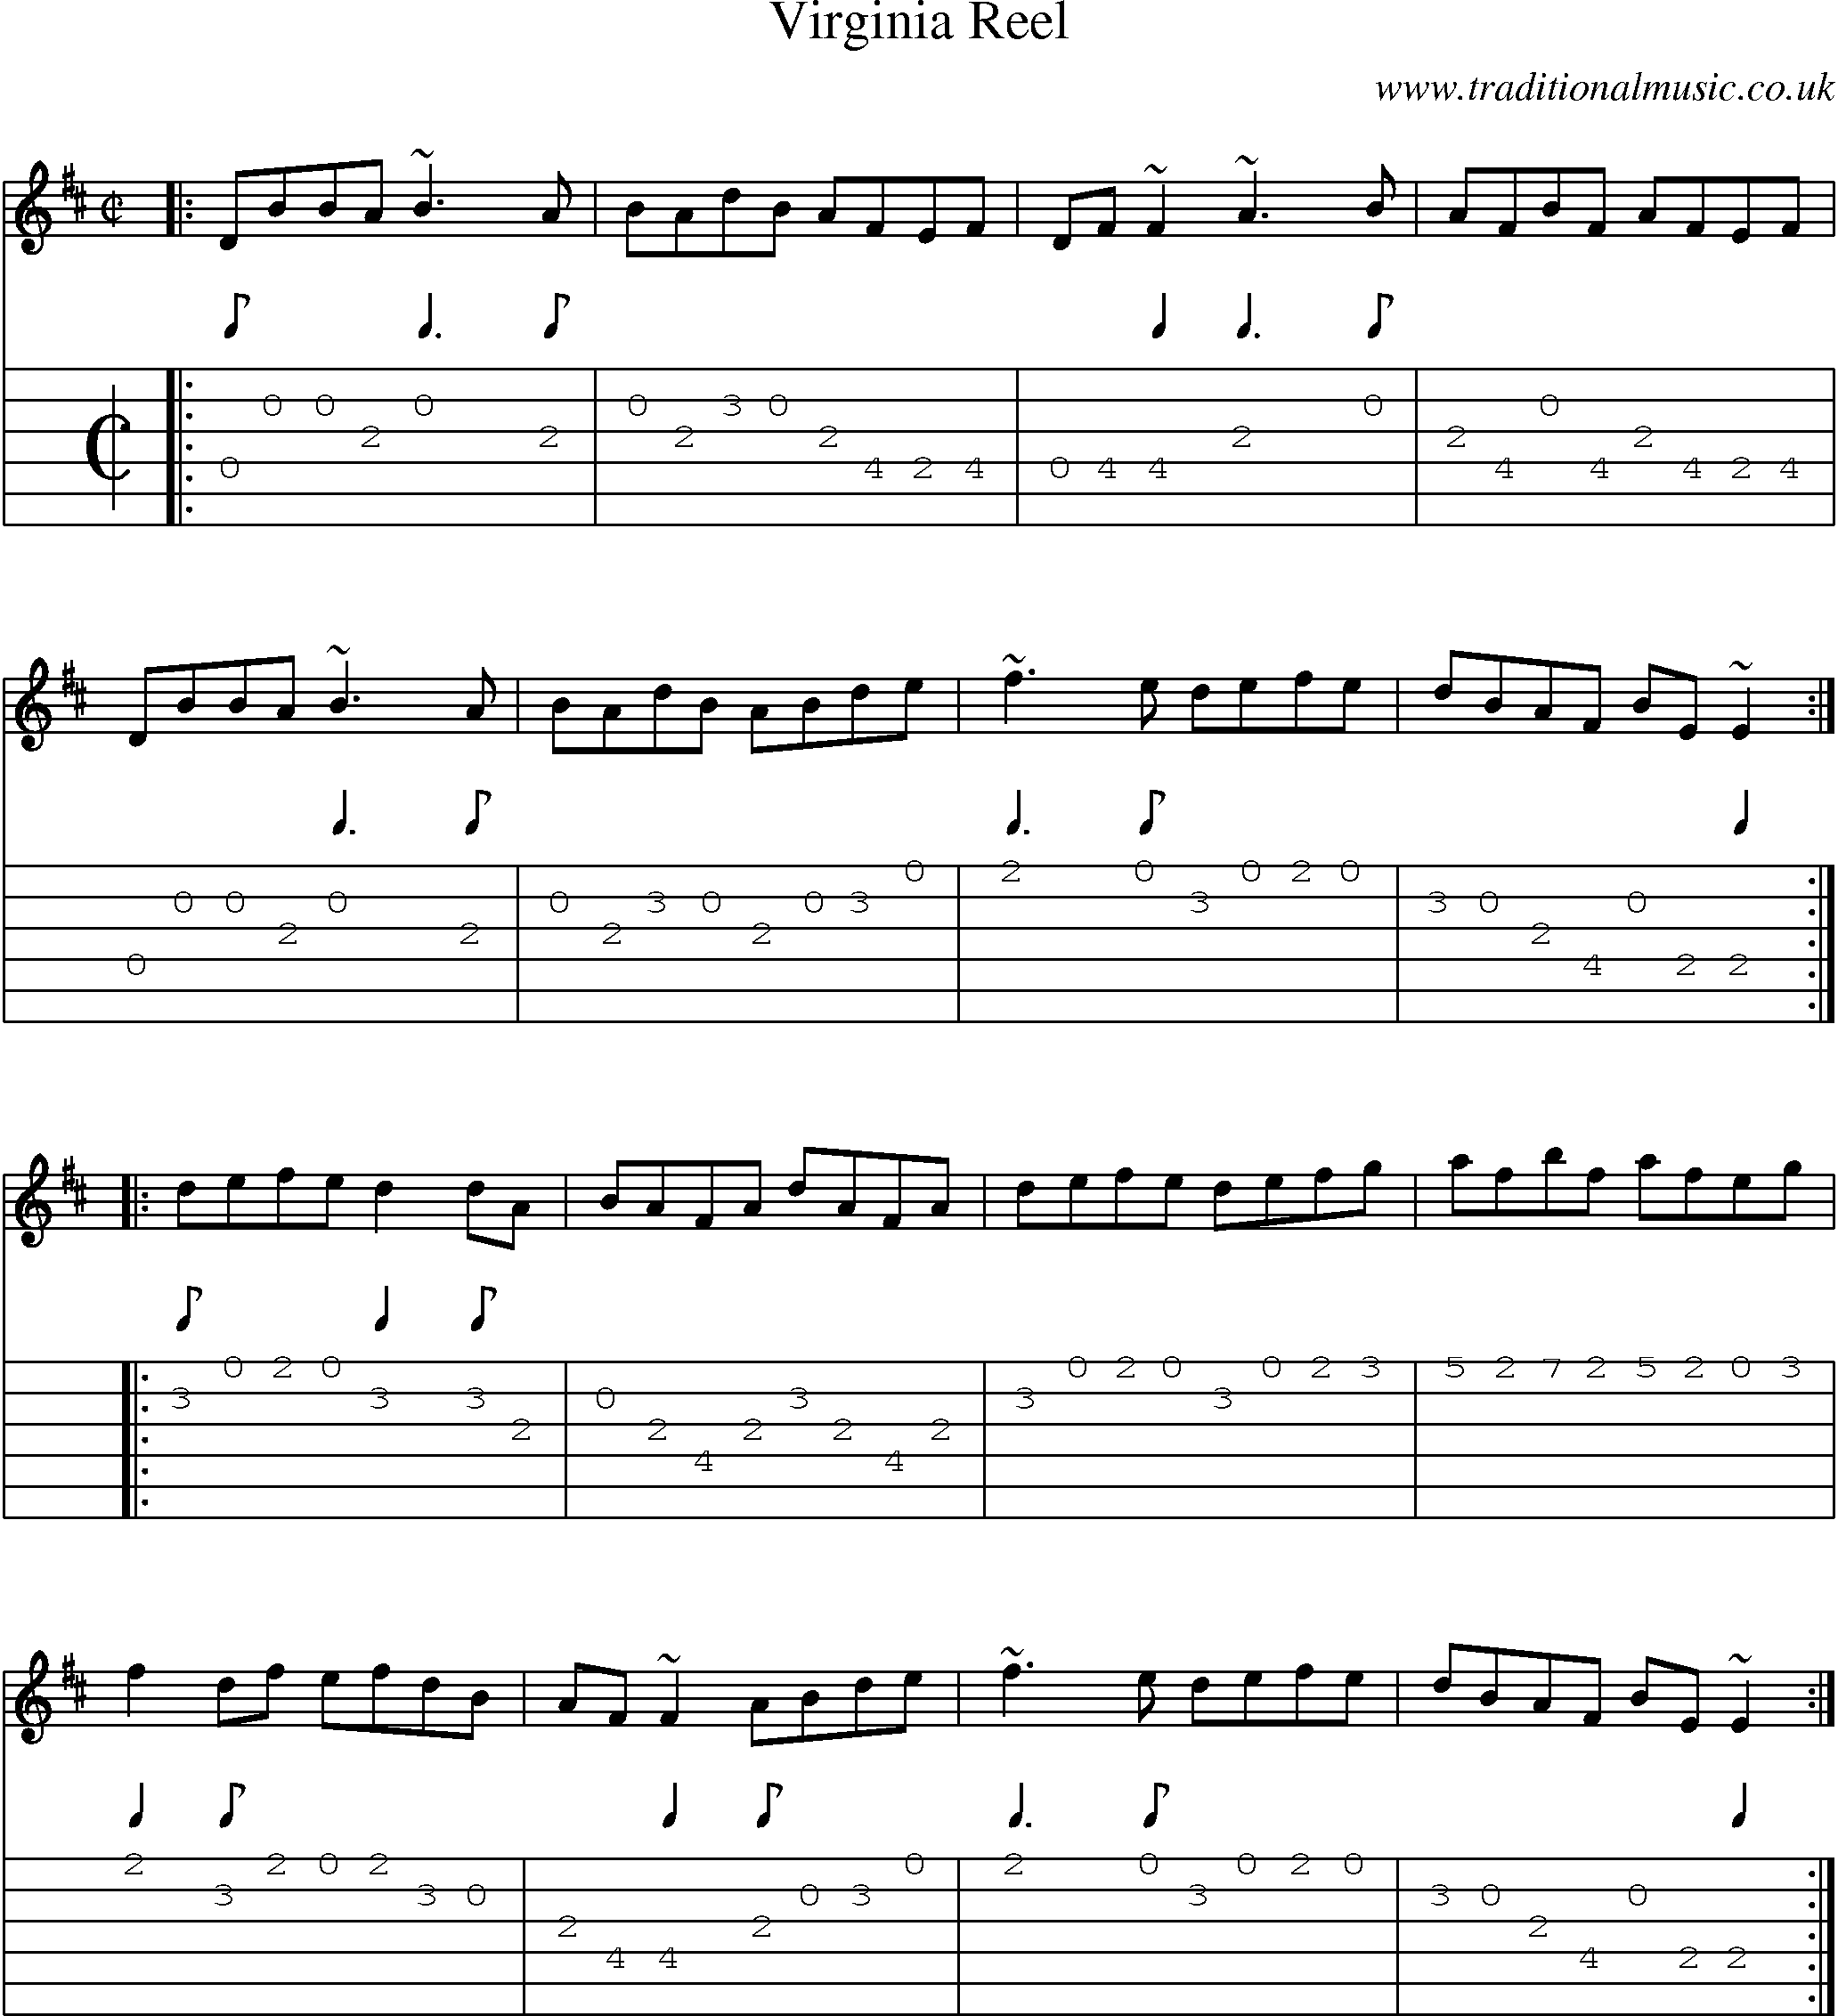 Music Score and Guitar Tabs for Virginia Reel